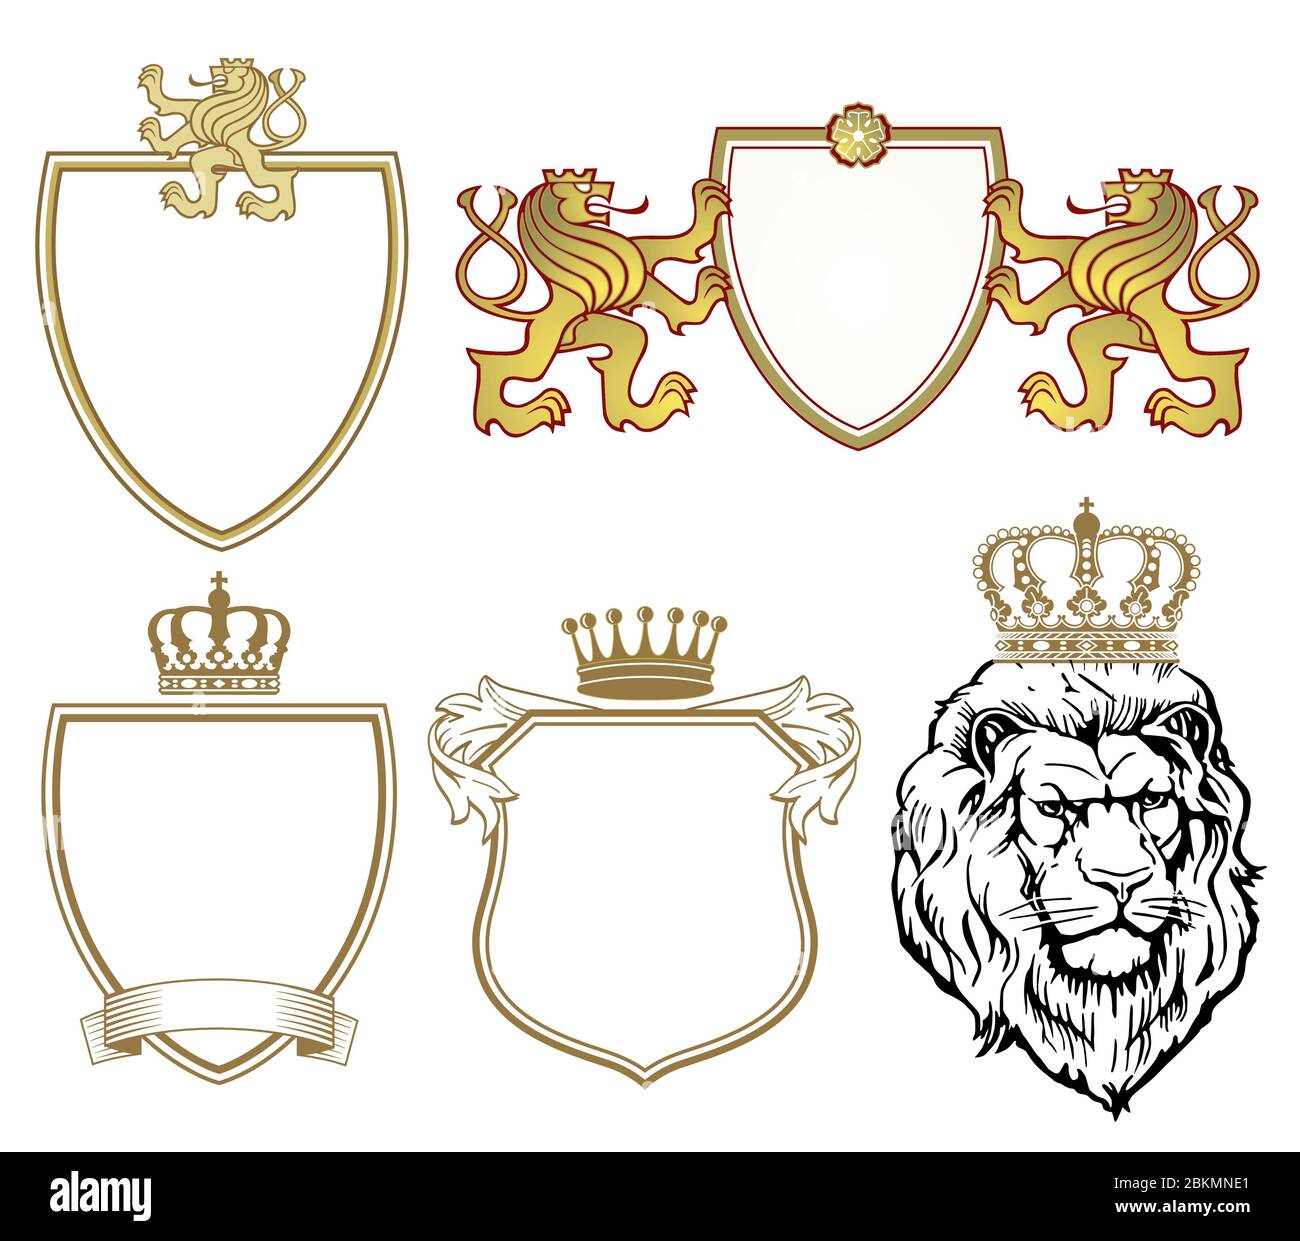 Coat of arms with lions and crowns Stock Vector